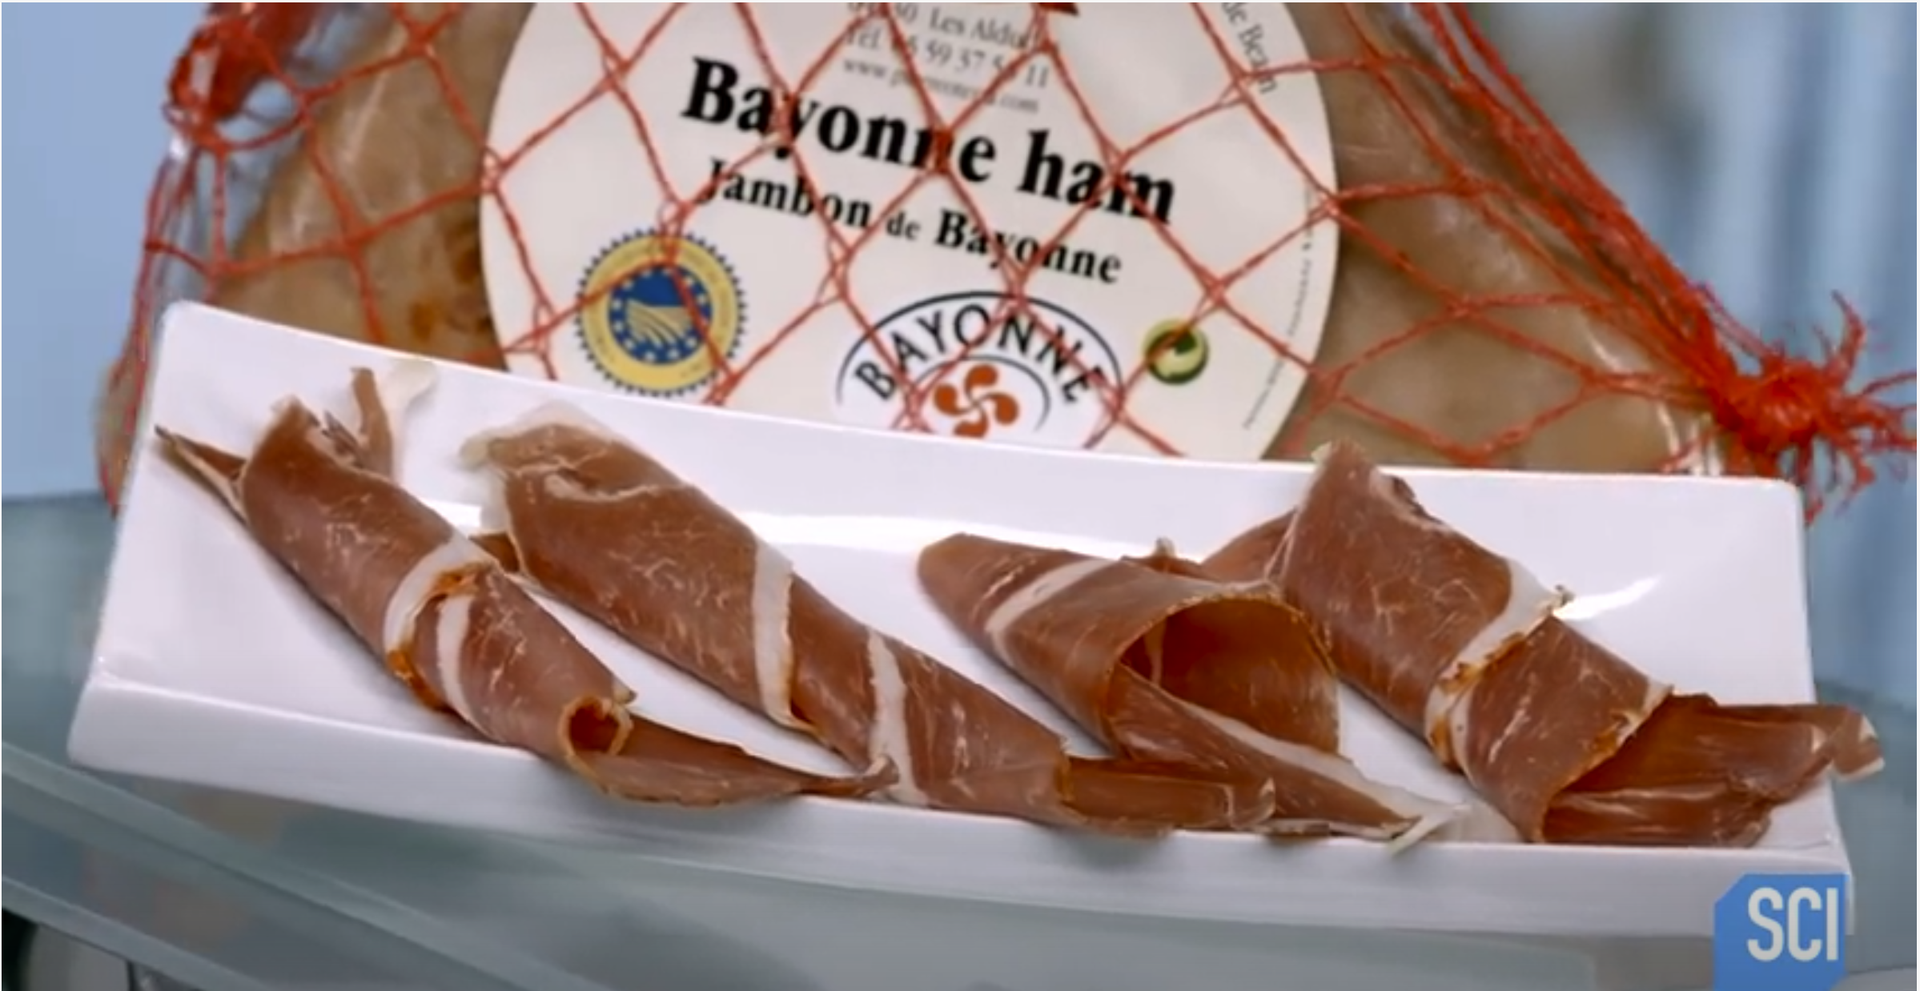 How It's Made: Traditional Basque Ham